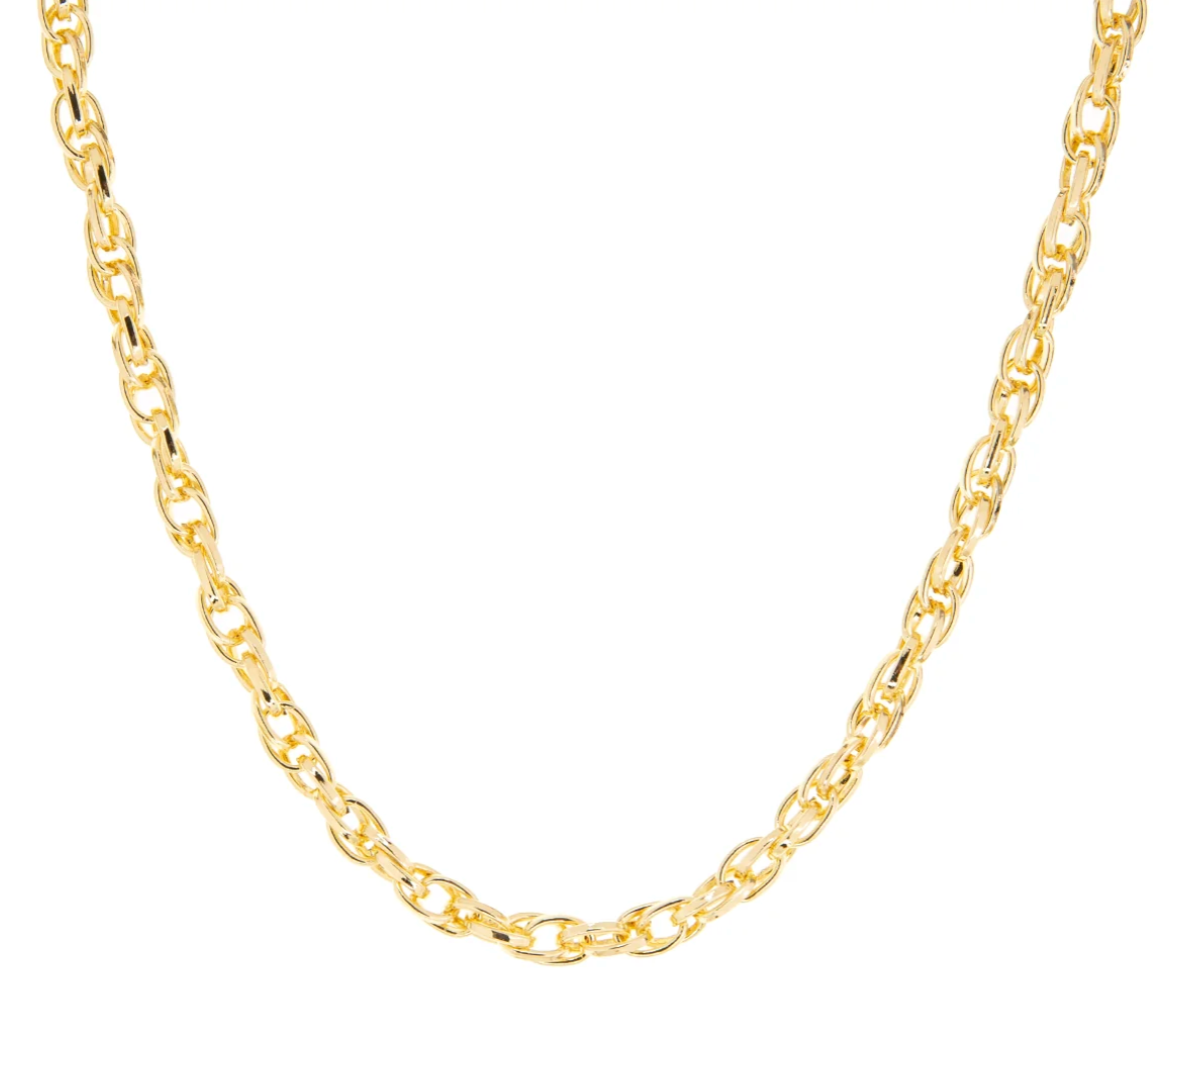 Double Oval Link Chain Necklace